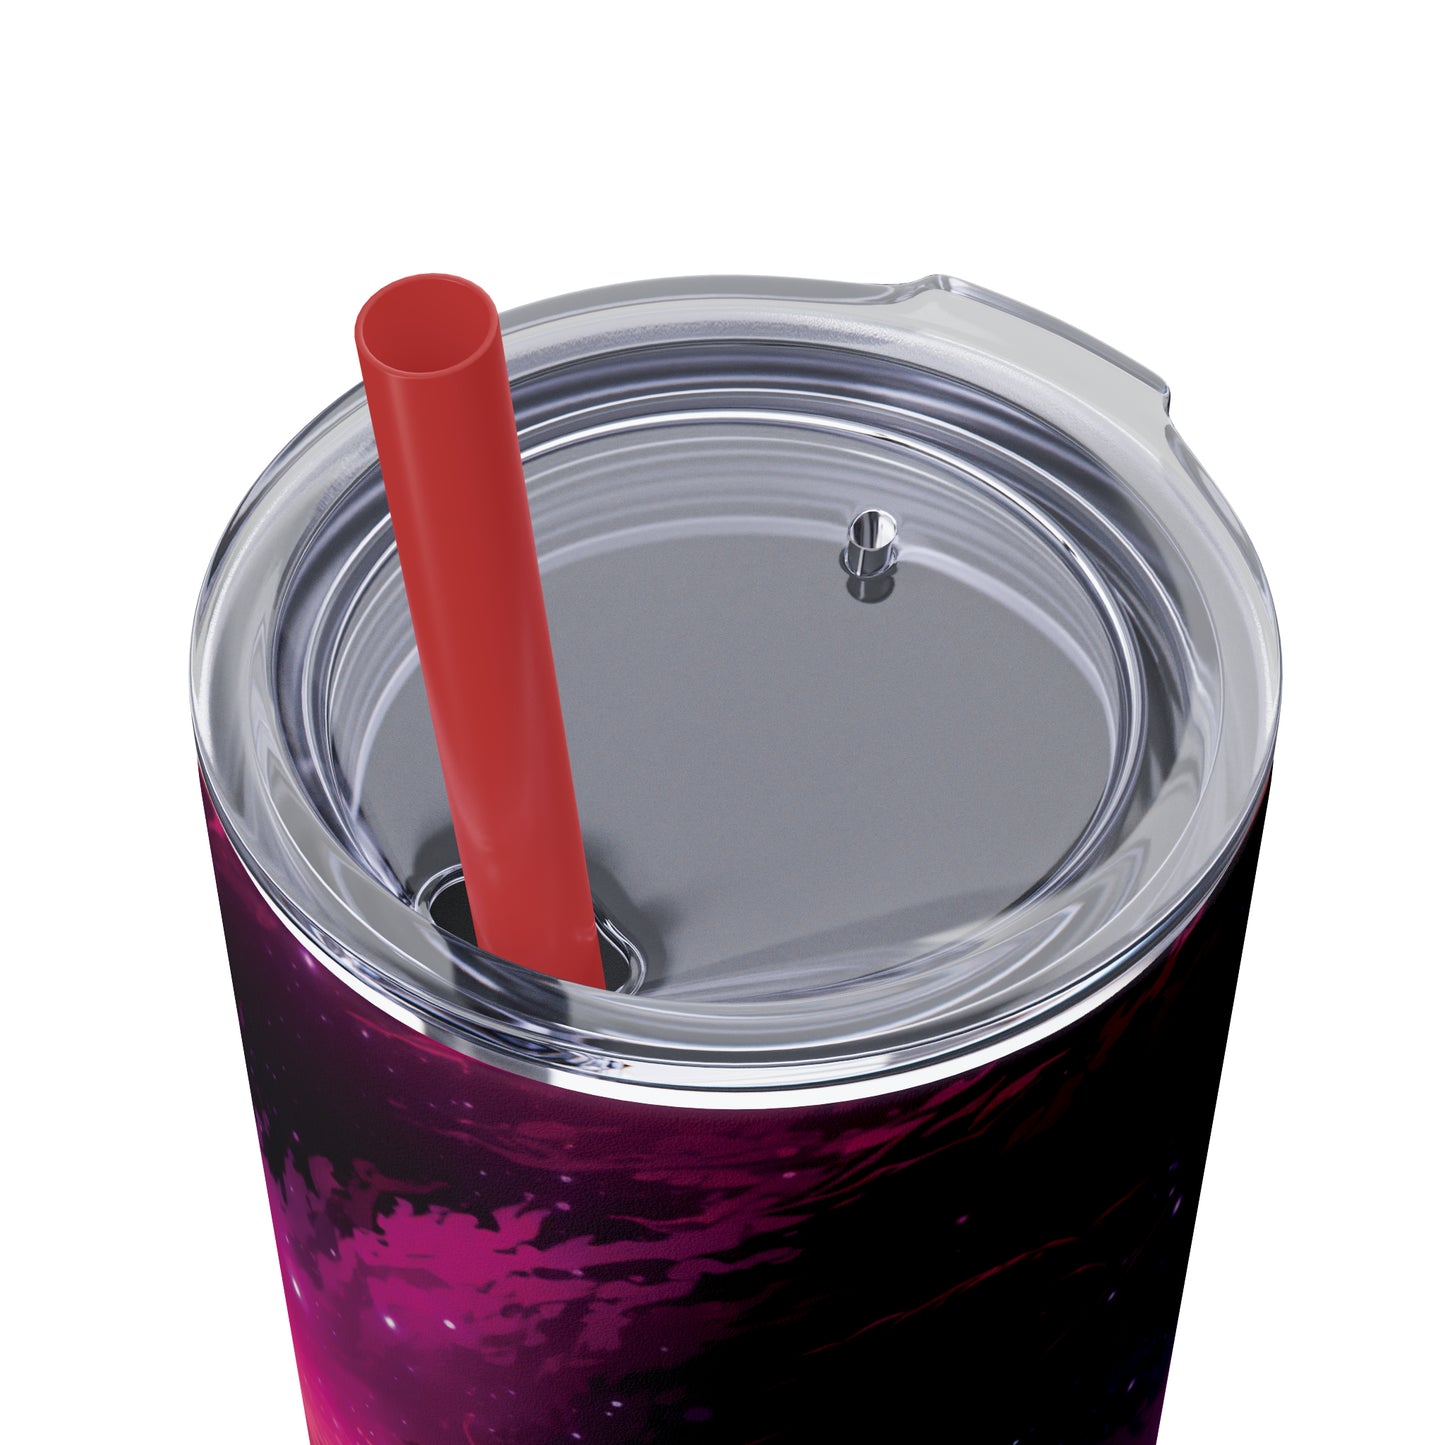 Cosmic Fantasy 20-Ounce Steel Skinny Tumbler with Lid and Straw - Dyborn Designs